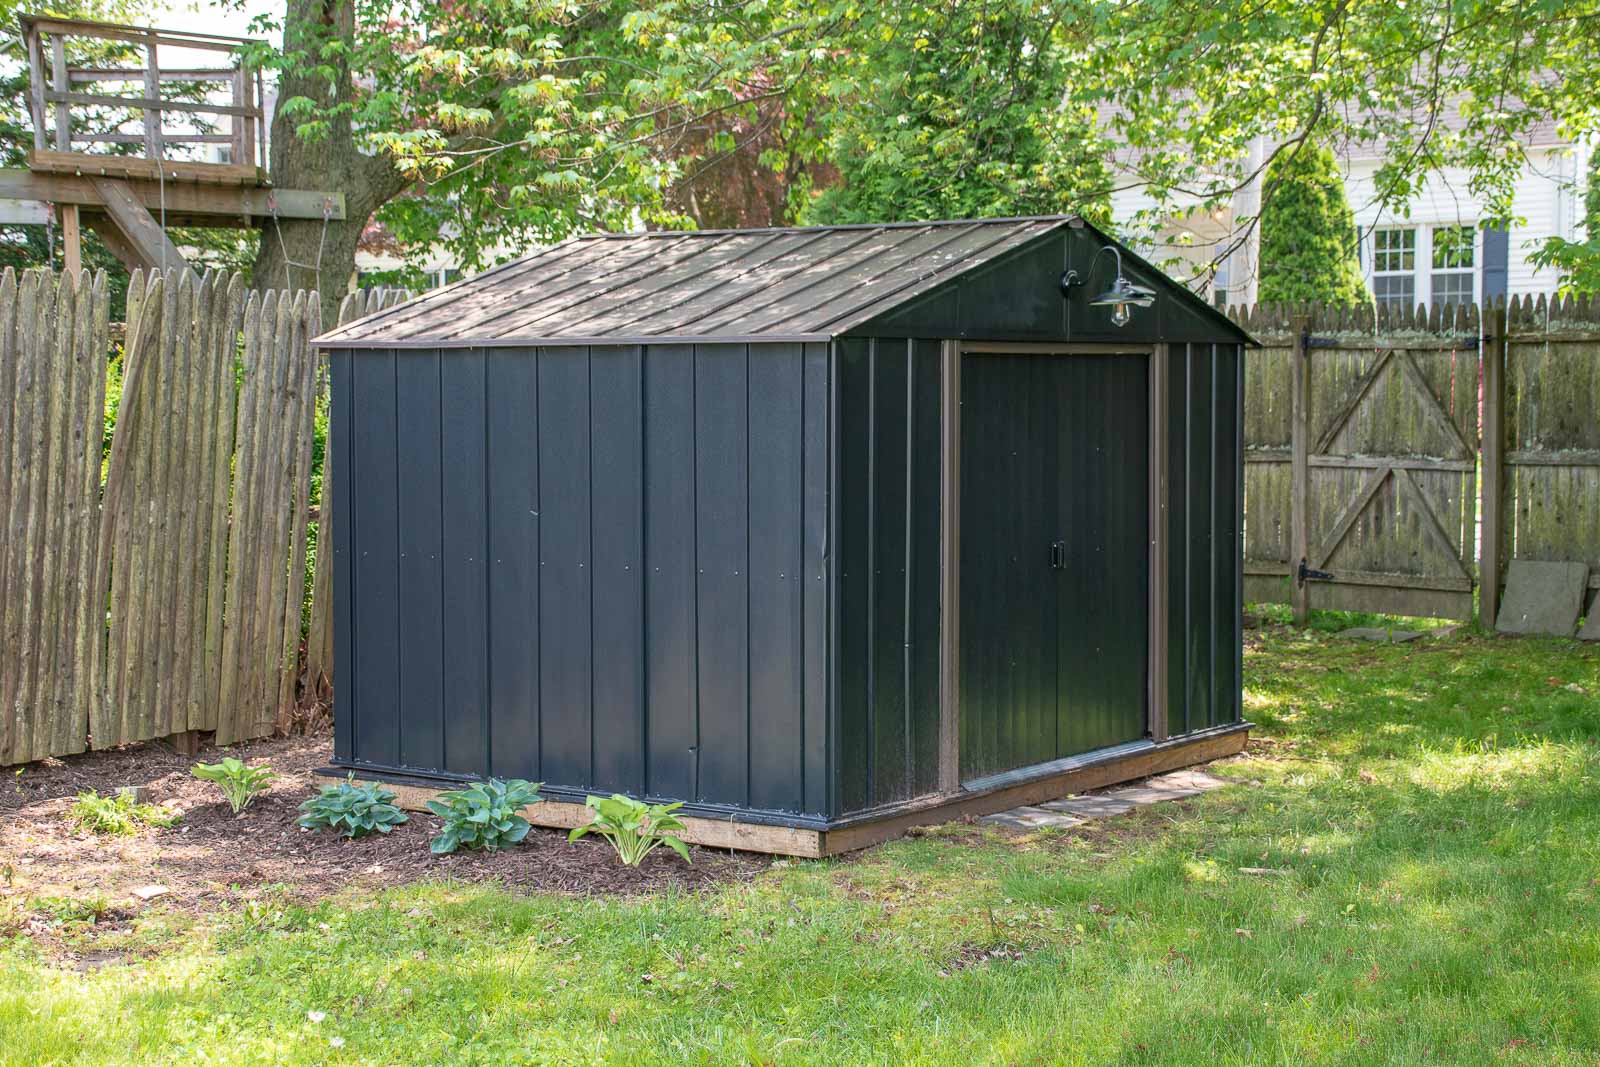 How To Improve The Appearance Of A Metal Shed